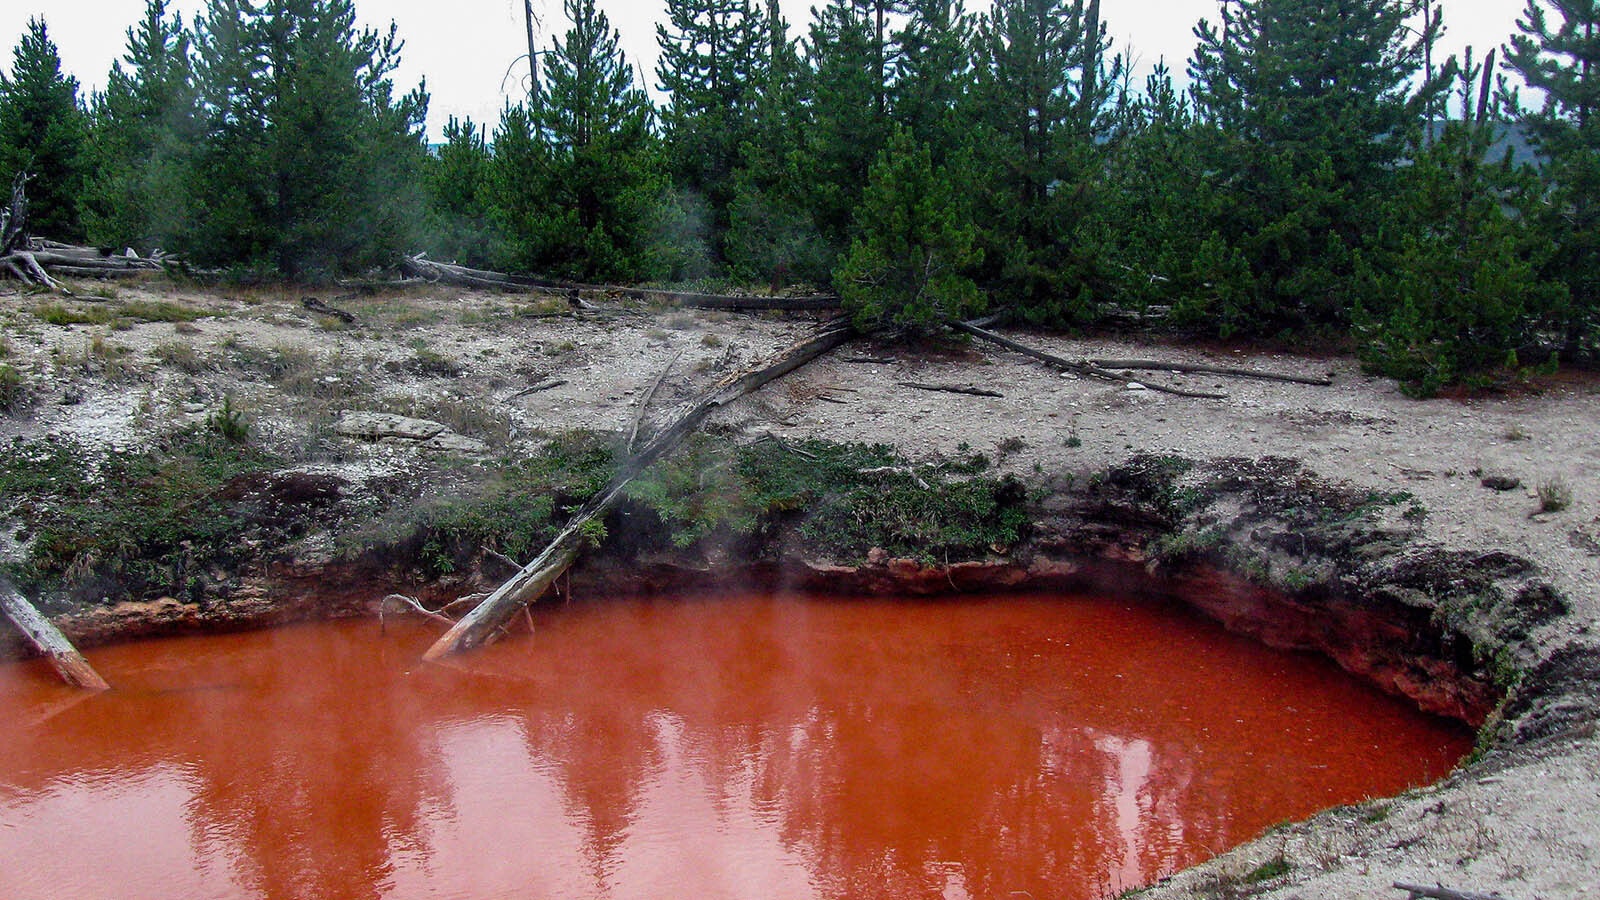 Tomato Soup Pool in Yellowstone National Park.